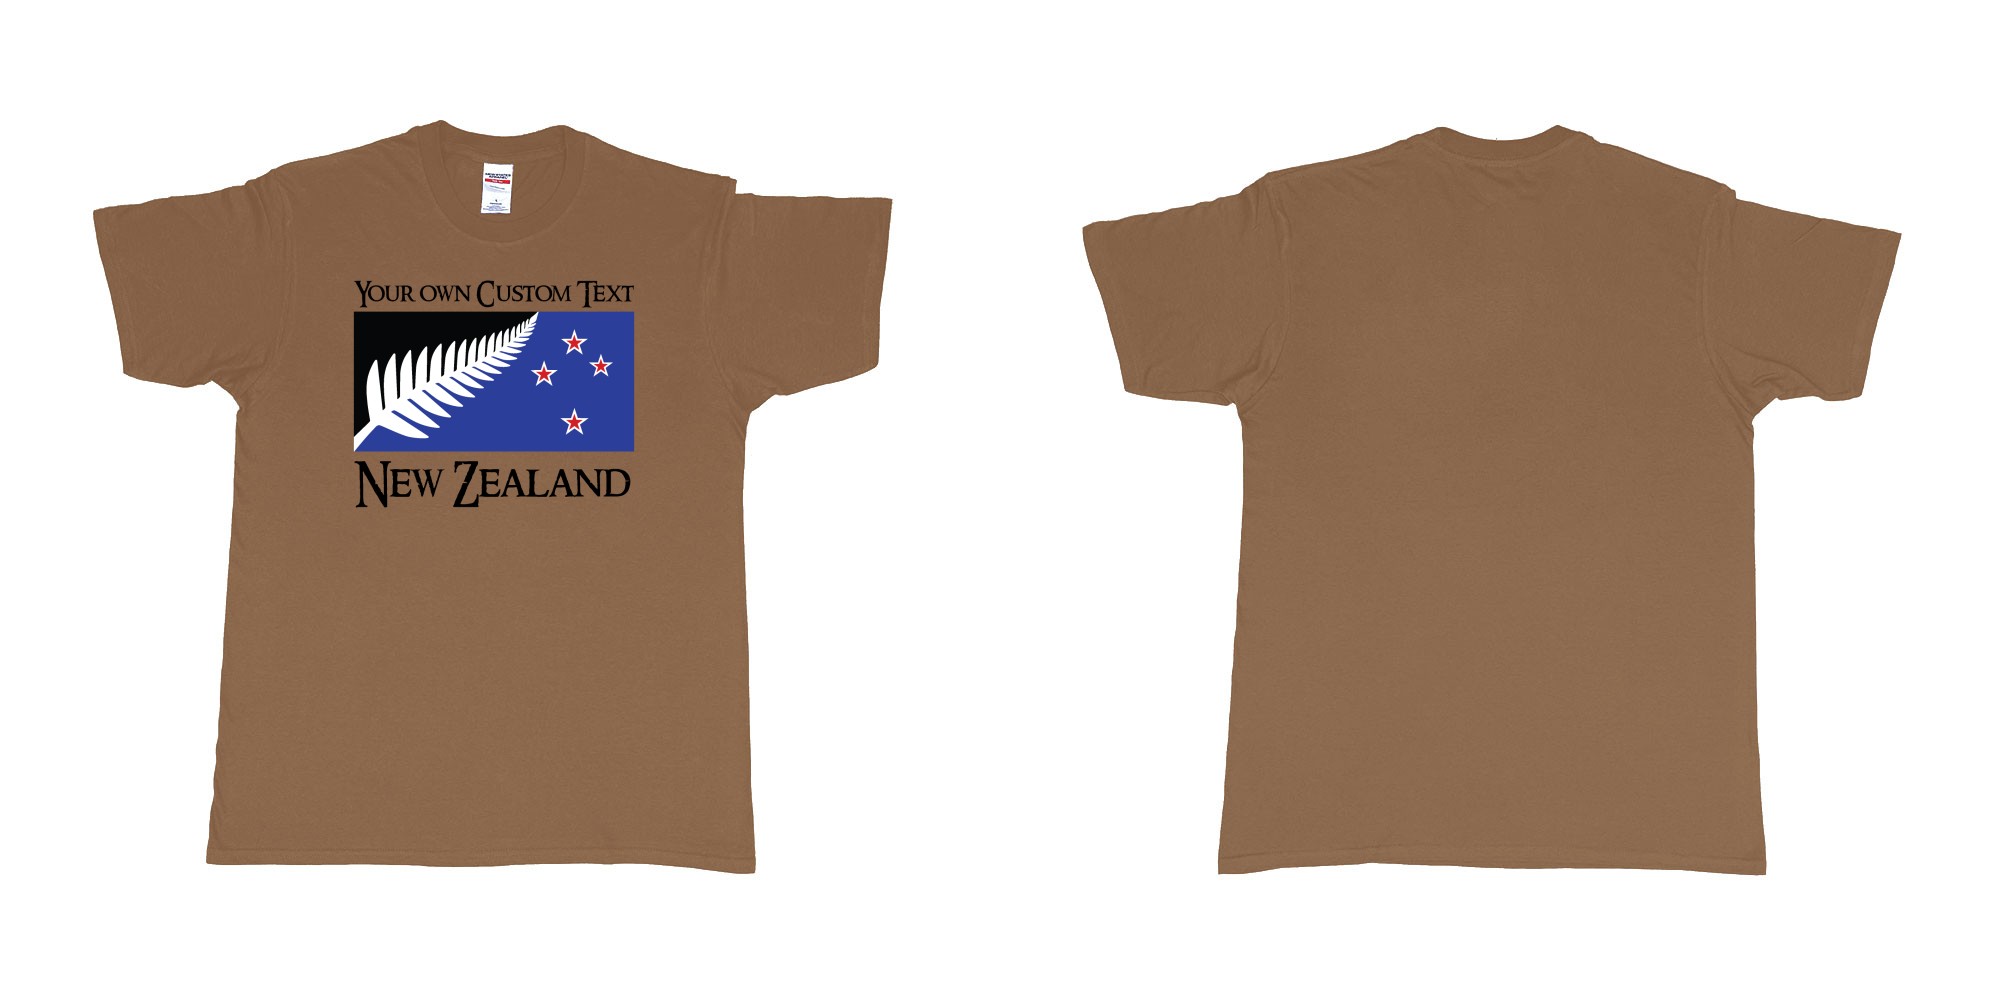 Custom tshirt design new zealand silver fern flag in fabric color chestnut choice your own text made in Bali by The Pirate Way